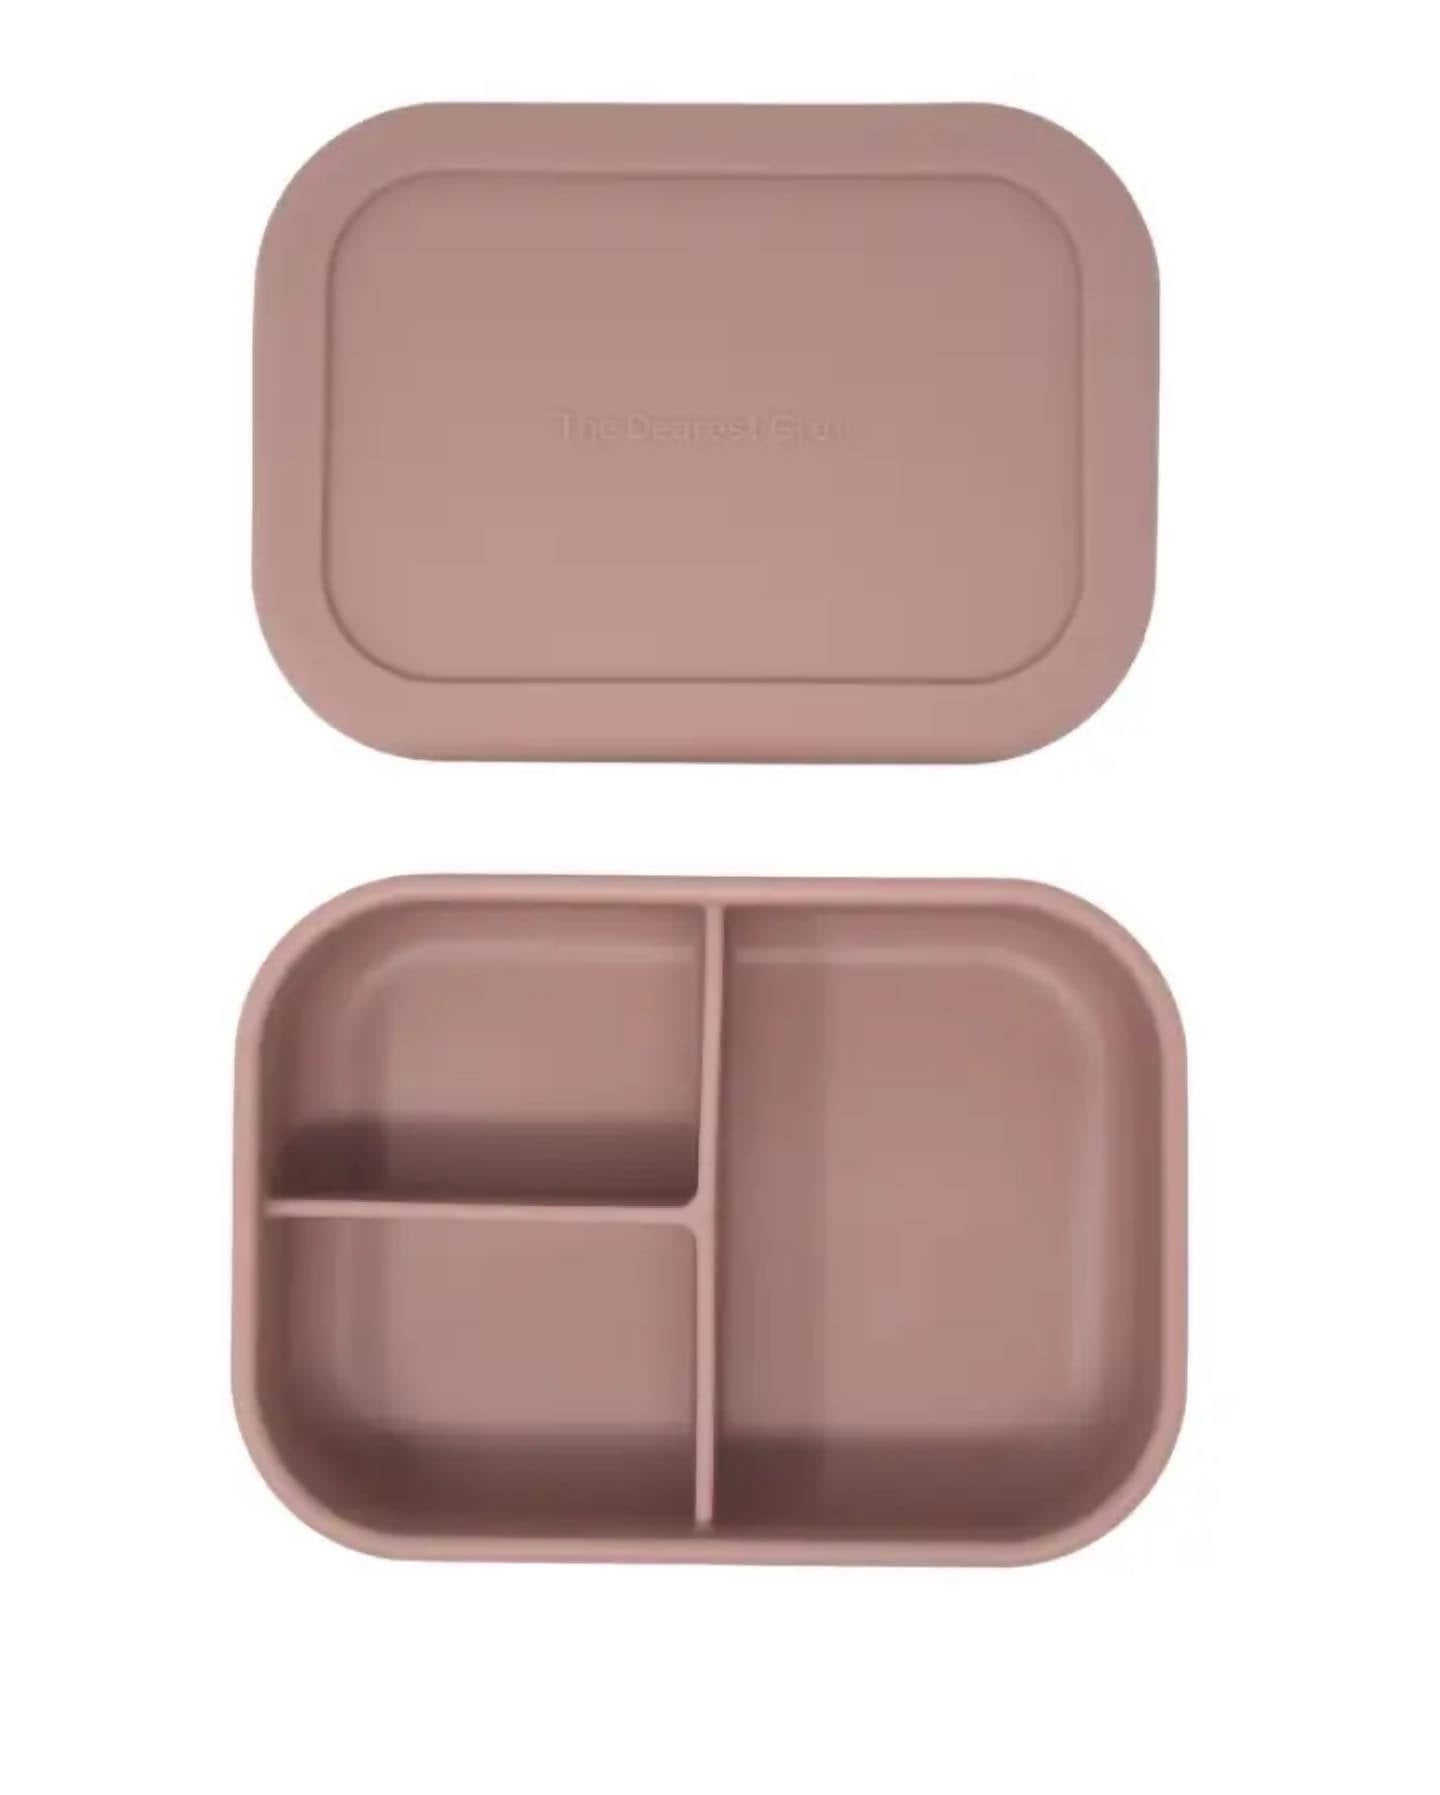 Silicone Bento Box by The Dearest Grey